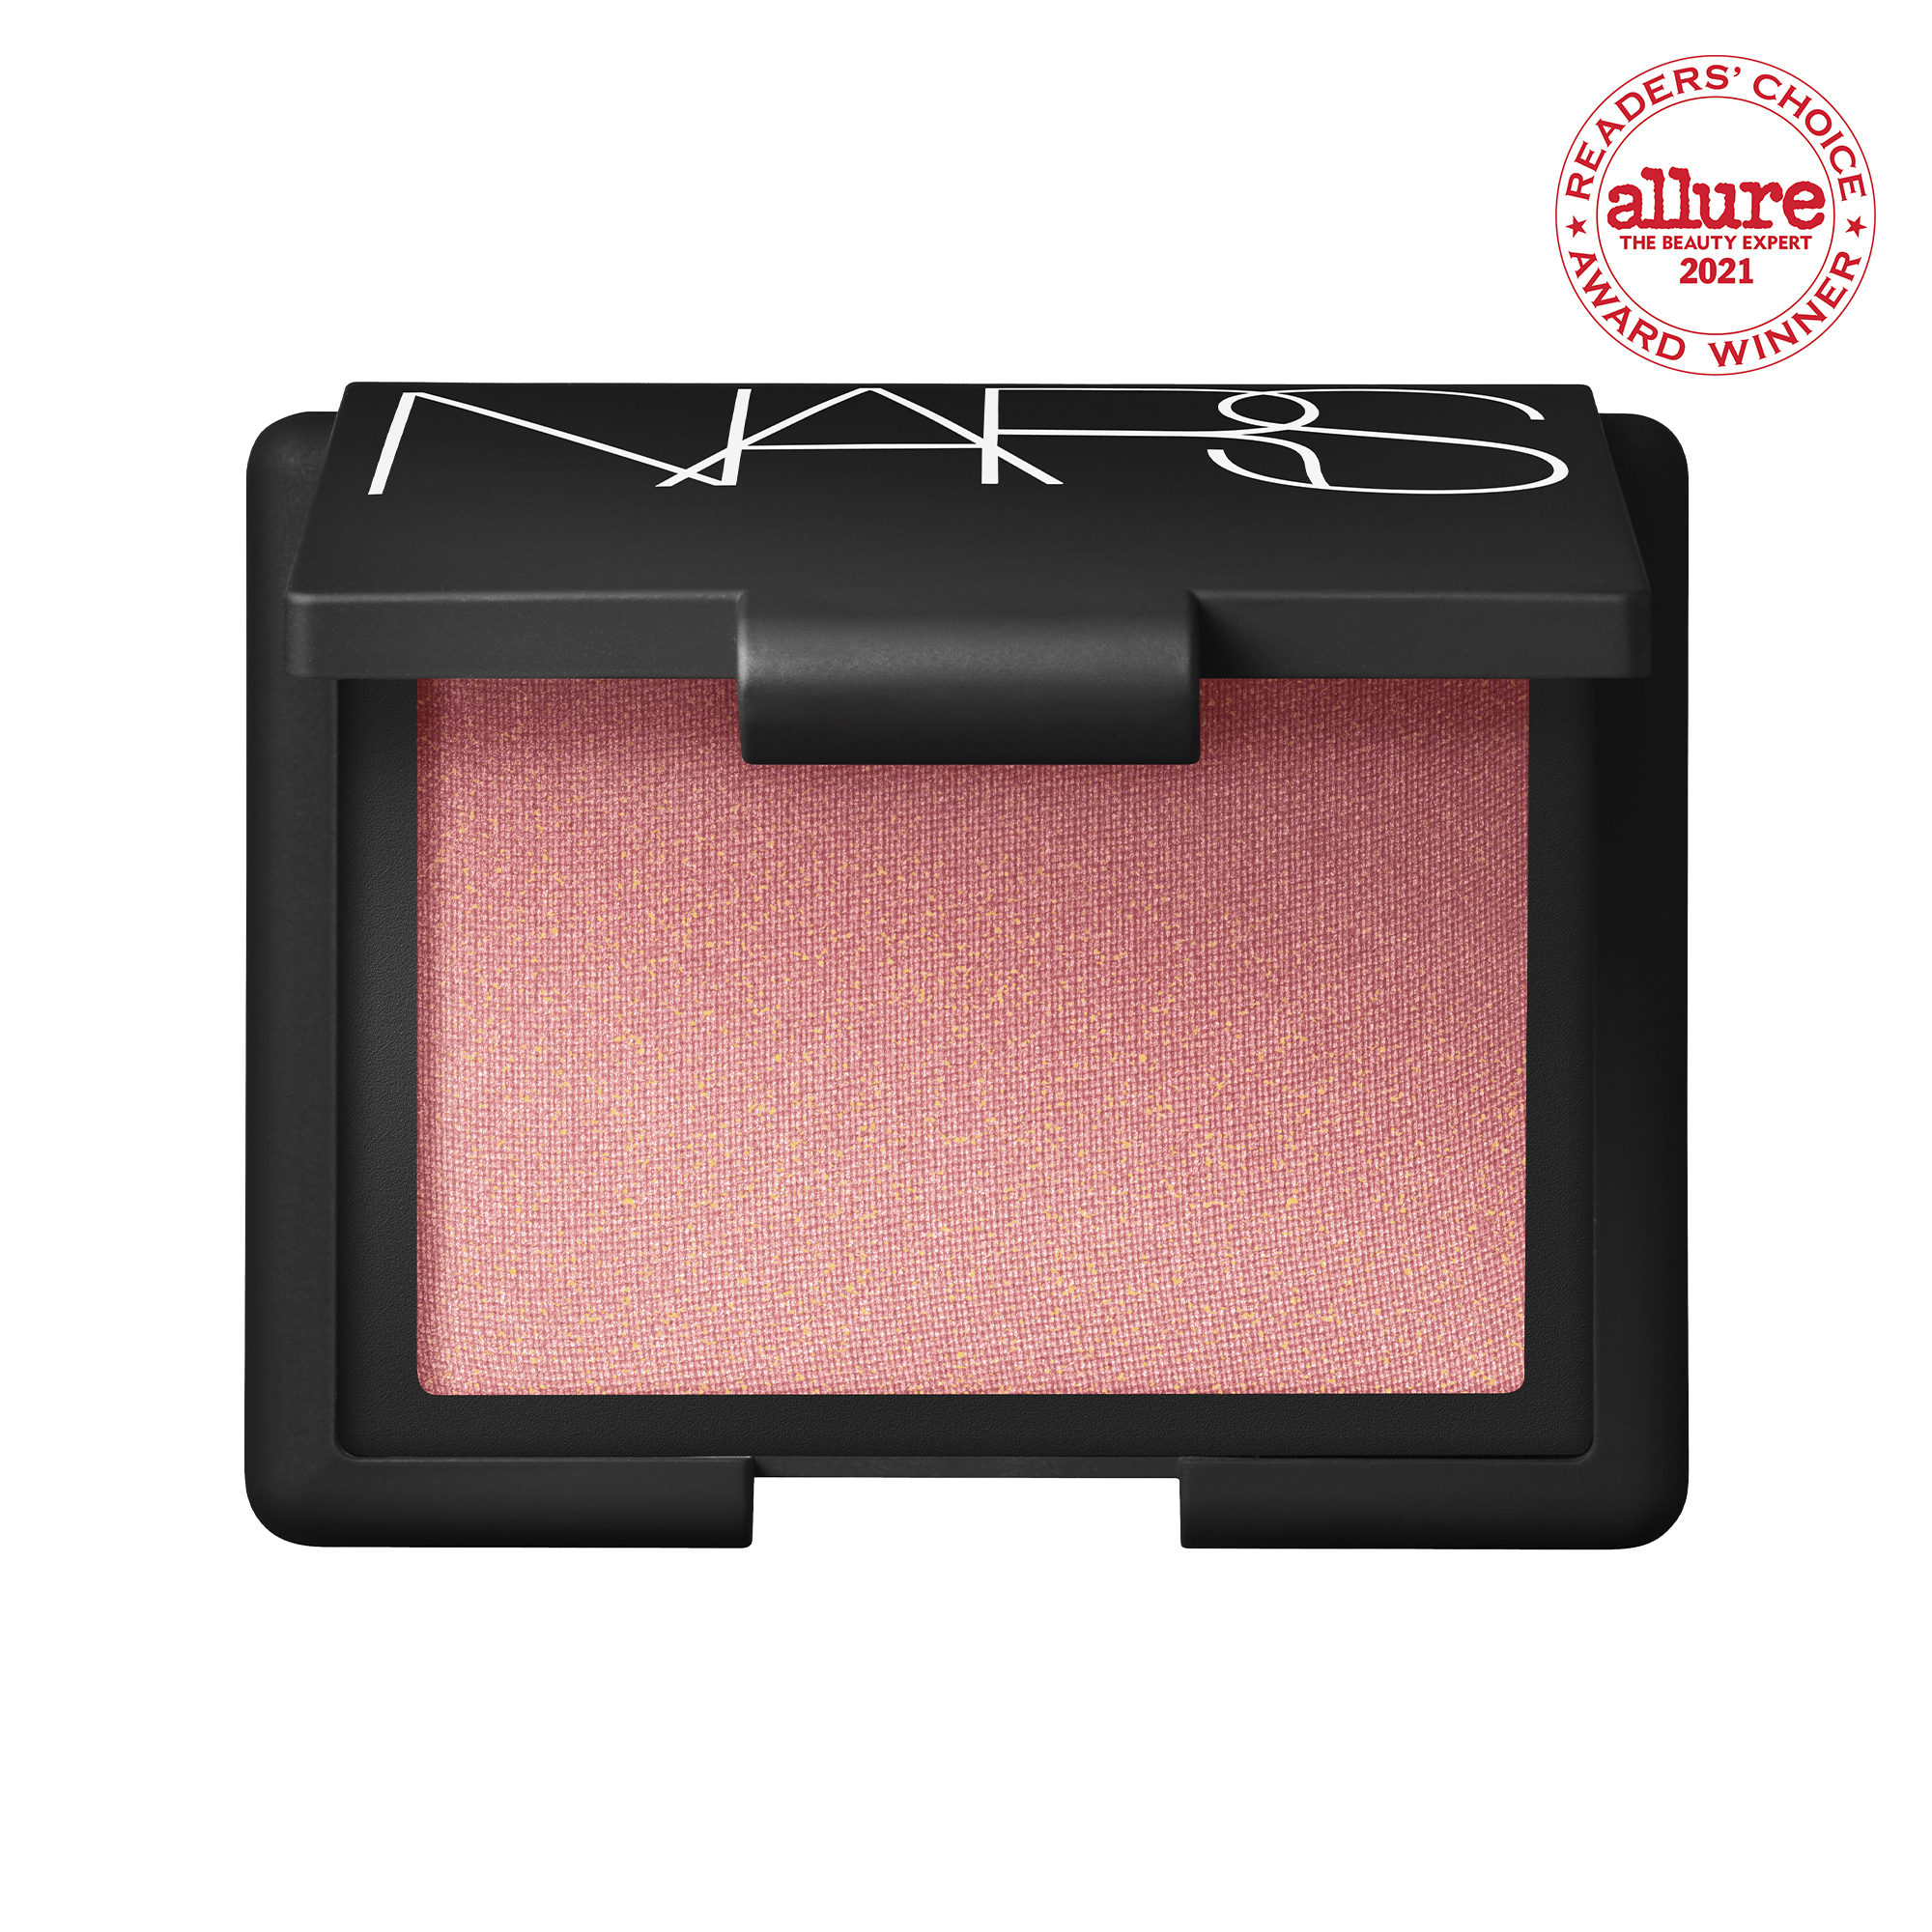 Nars Impassioned Blush Swatches and Review